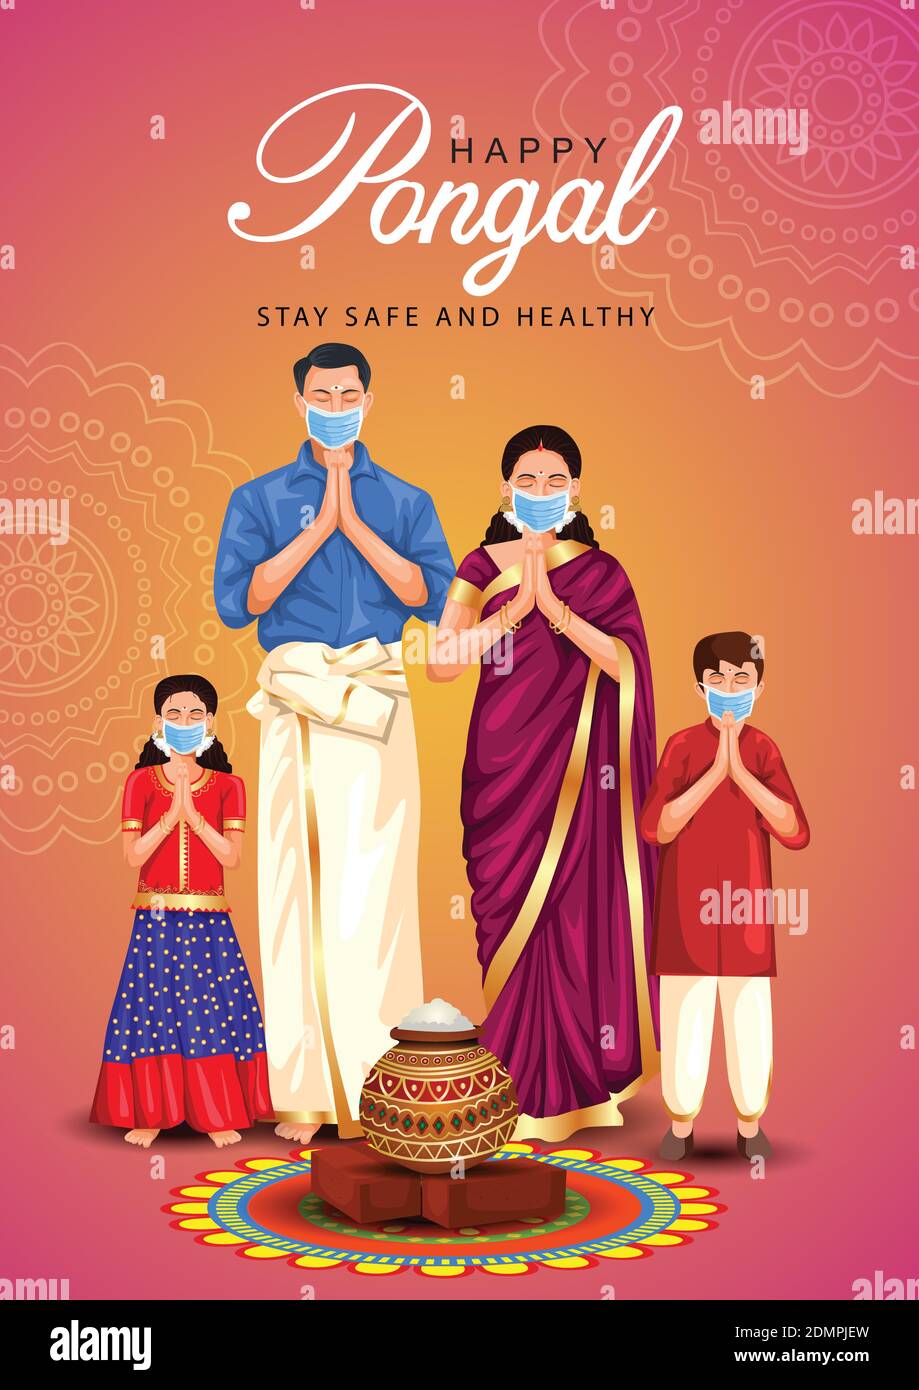 Happy Pongal celebration with Rangoli, pot and rice. Tamil family offering prayers. Indian cultural festival celebration concept vector illustration g Stock Vector